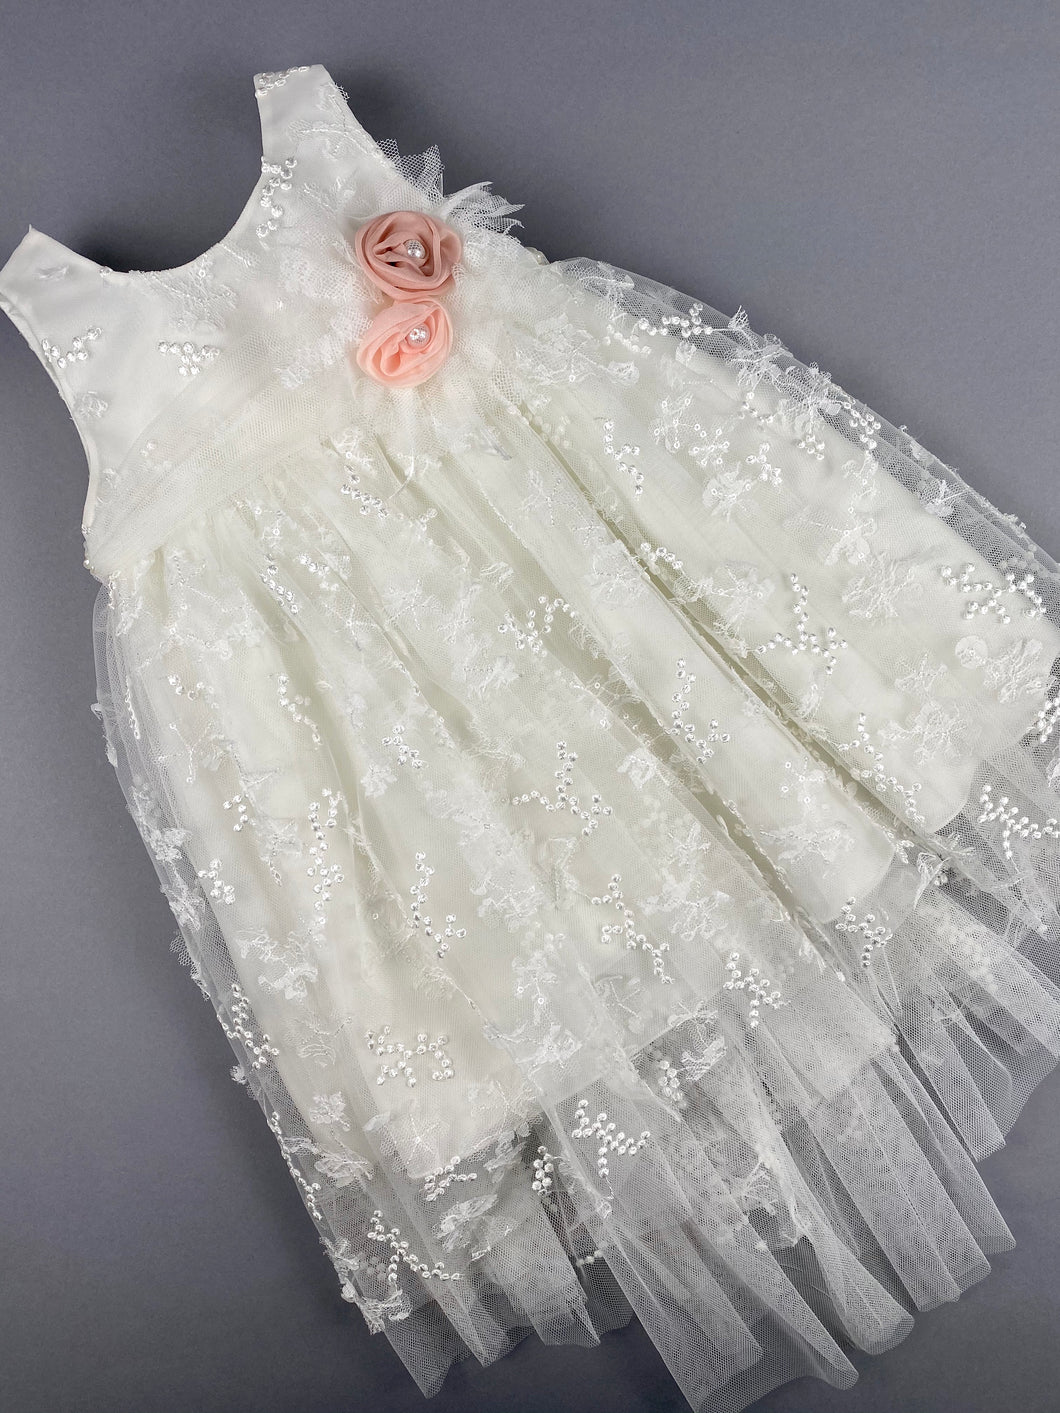 Dress 28 Girls Baptismal Christening Sleeveless  3pc French Lace Layered  Dress with long French Lace trail, matching Bolero and Hat. Made in Greece exclusively for Rosies Collections.